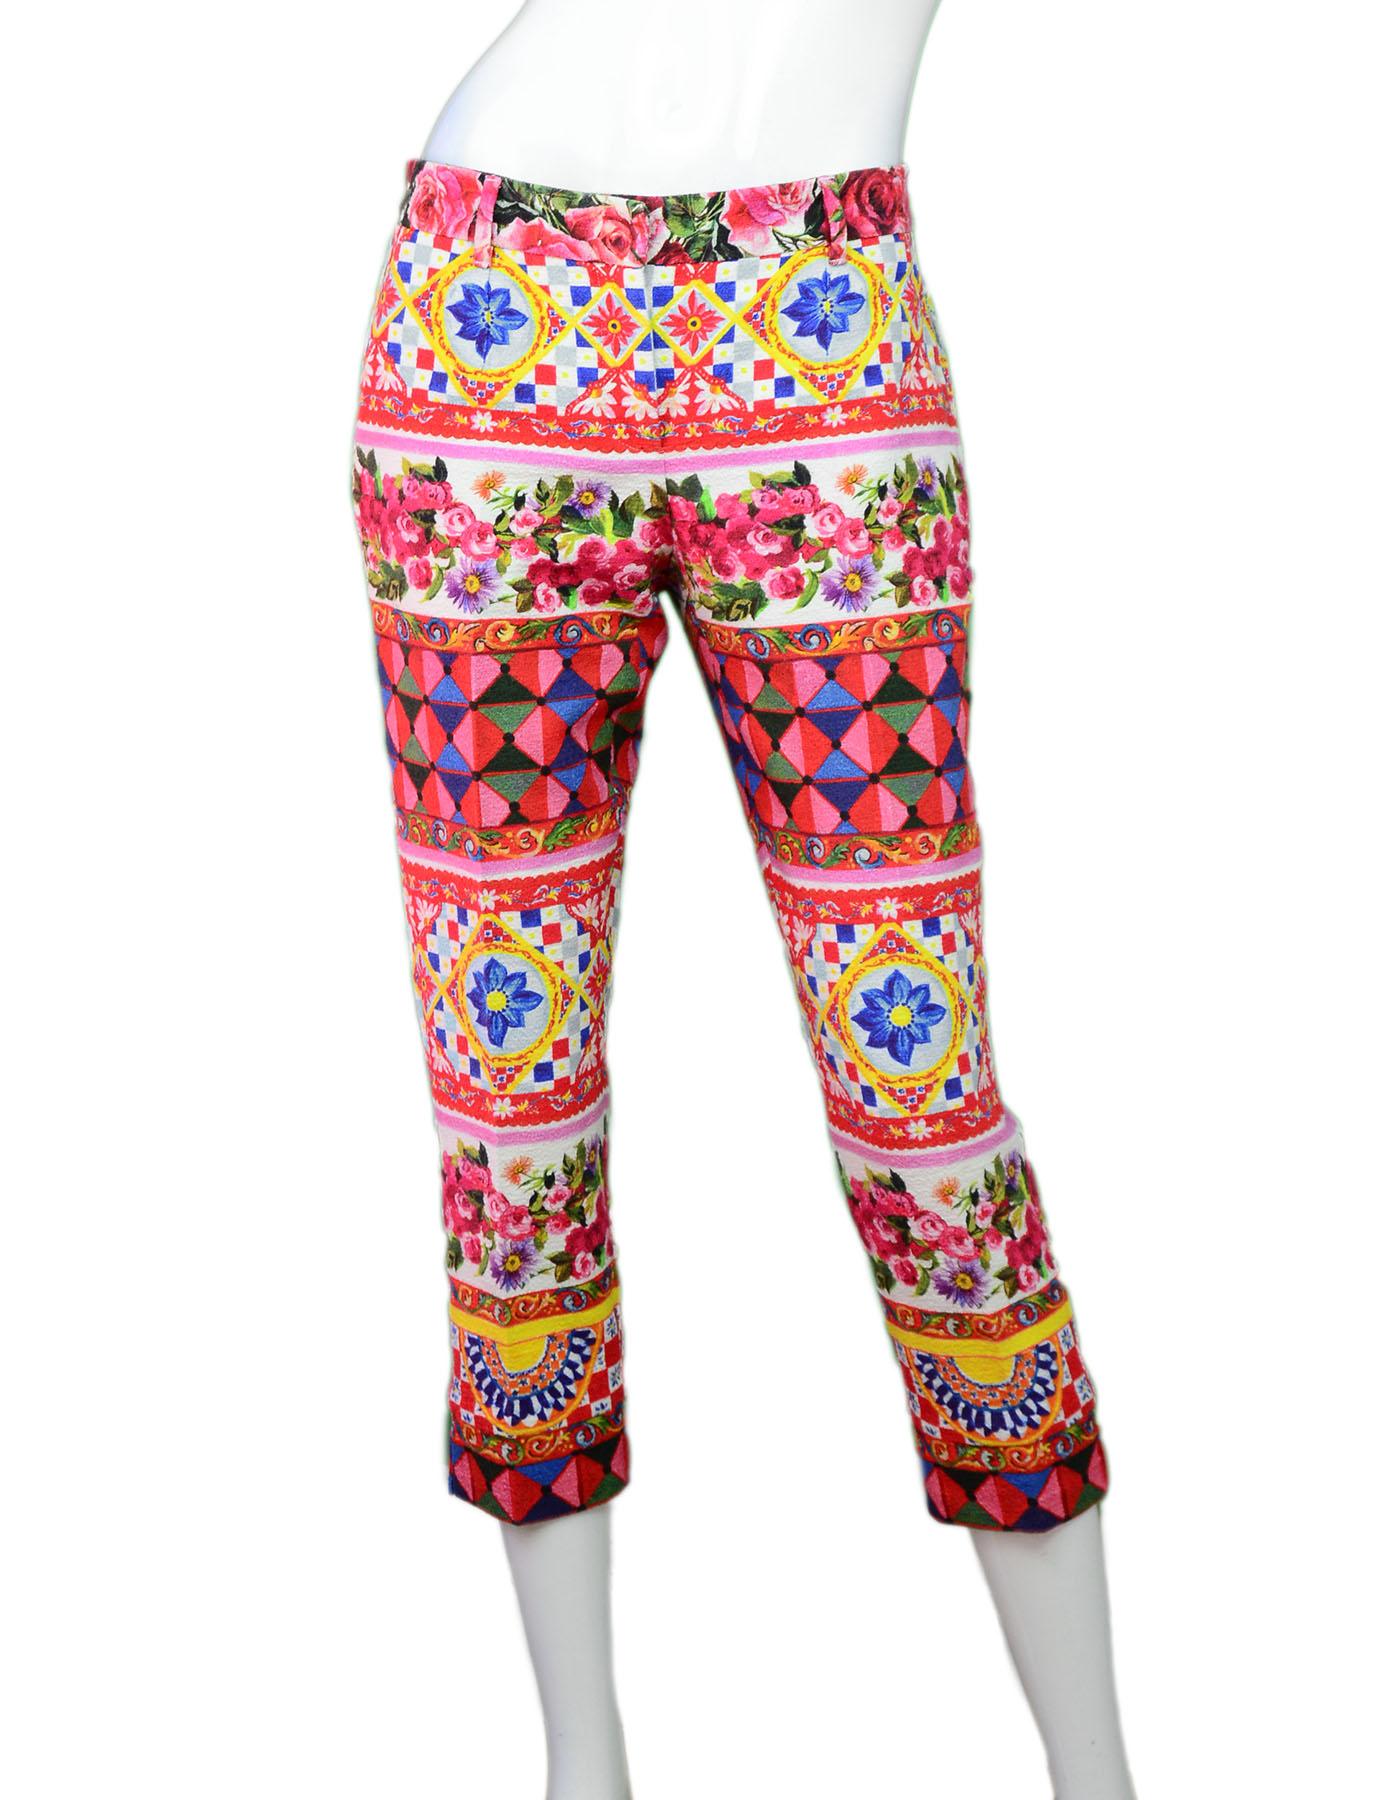 Dolce & Gabbana Multi-Color Majolica Capri Sz IT40

Made In: Italy
Color: Multi
Composition: 99% cotton, 1% elastane
Closure/Opening: Font zip and snap button closure
Exterior Pockets: None - pockets have been stitched closed
Overall Condition: